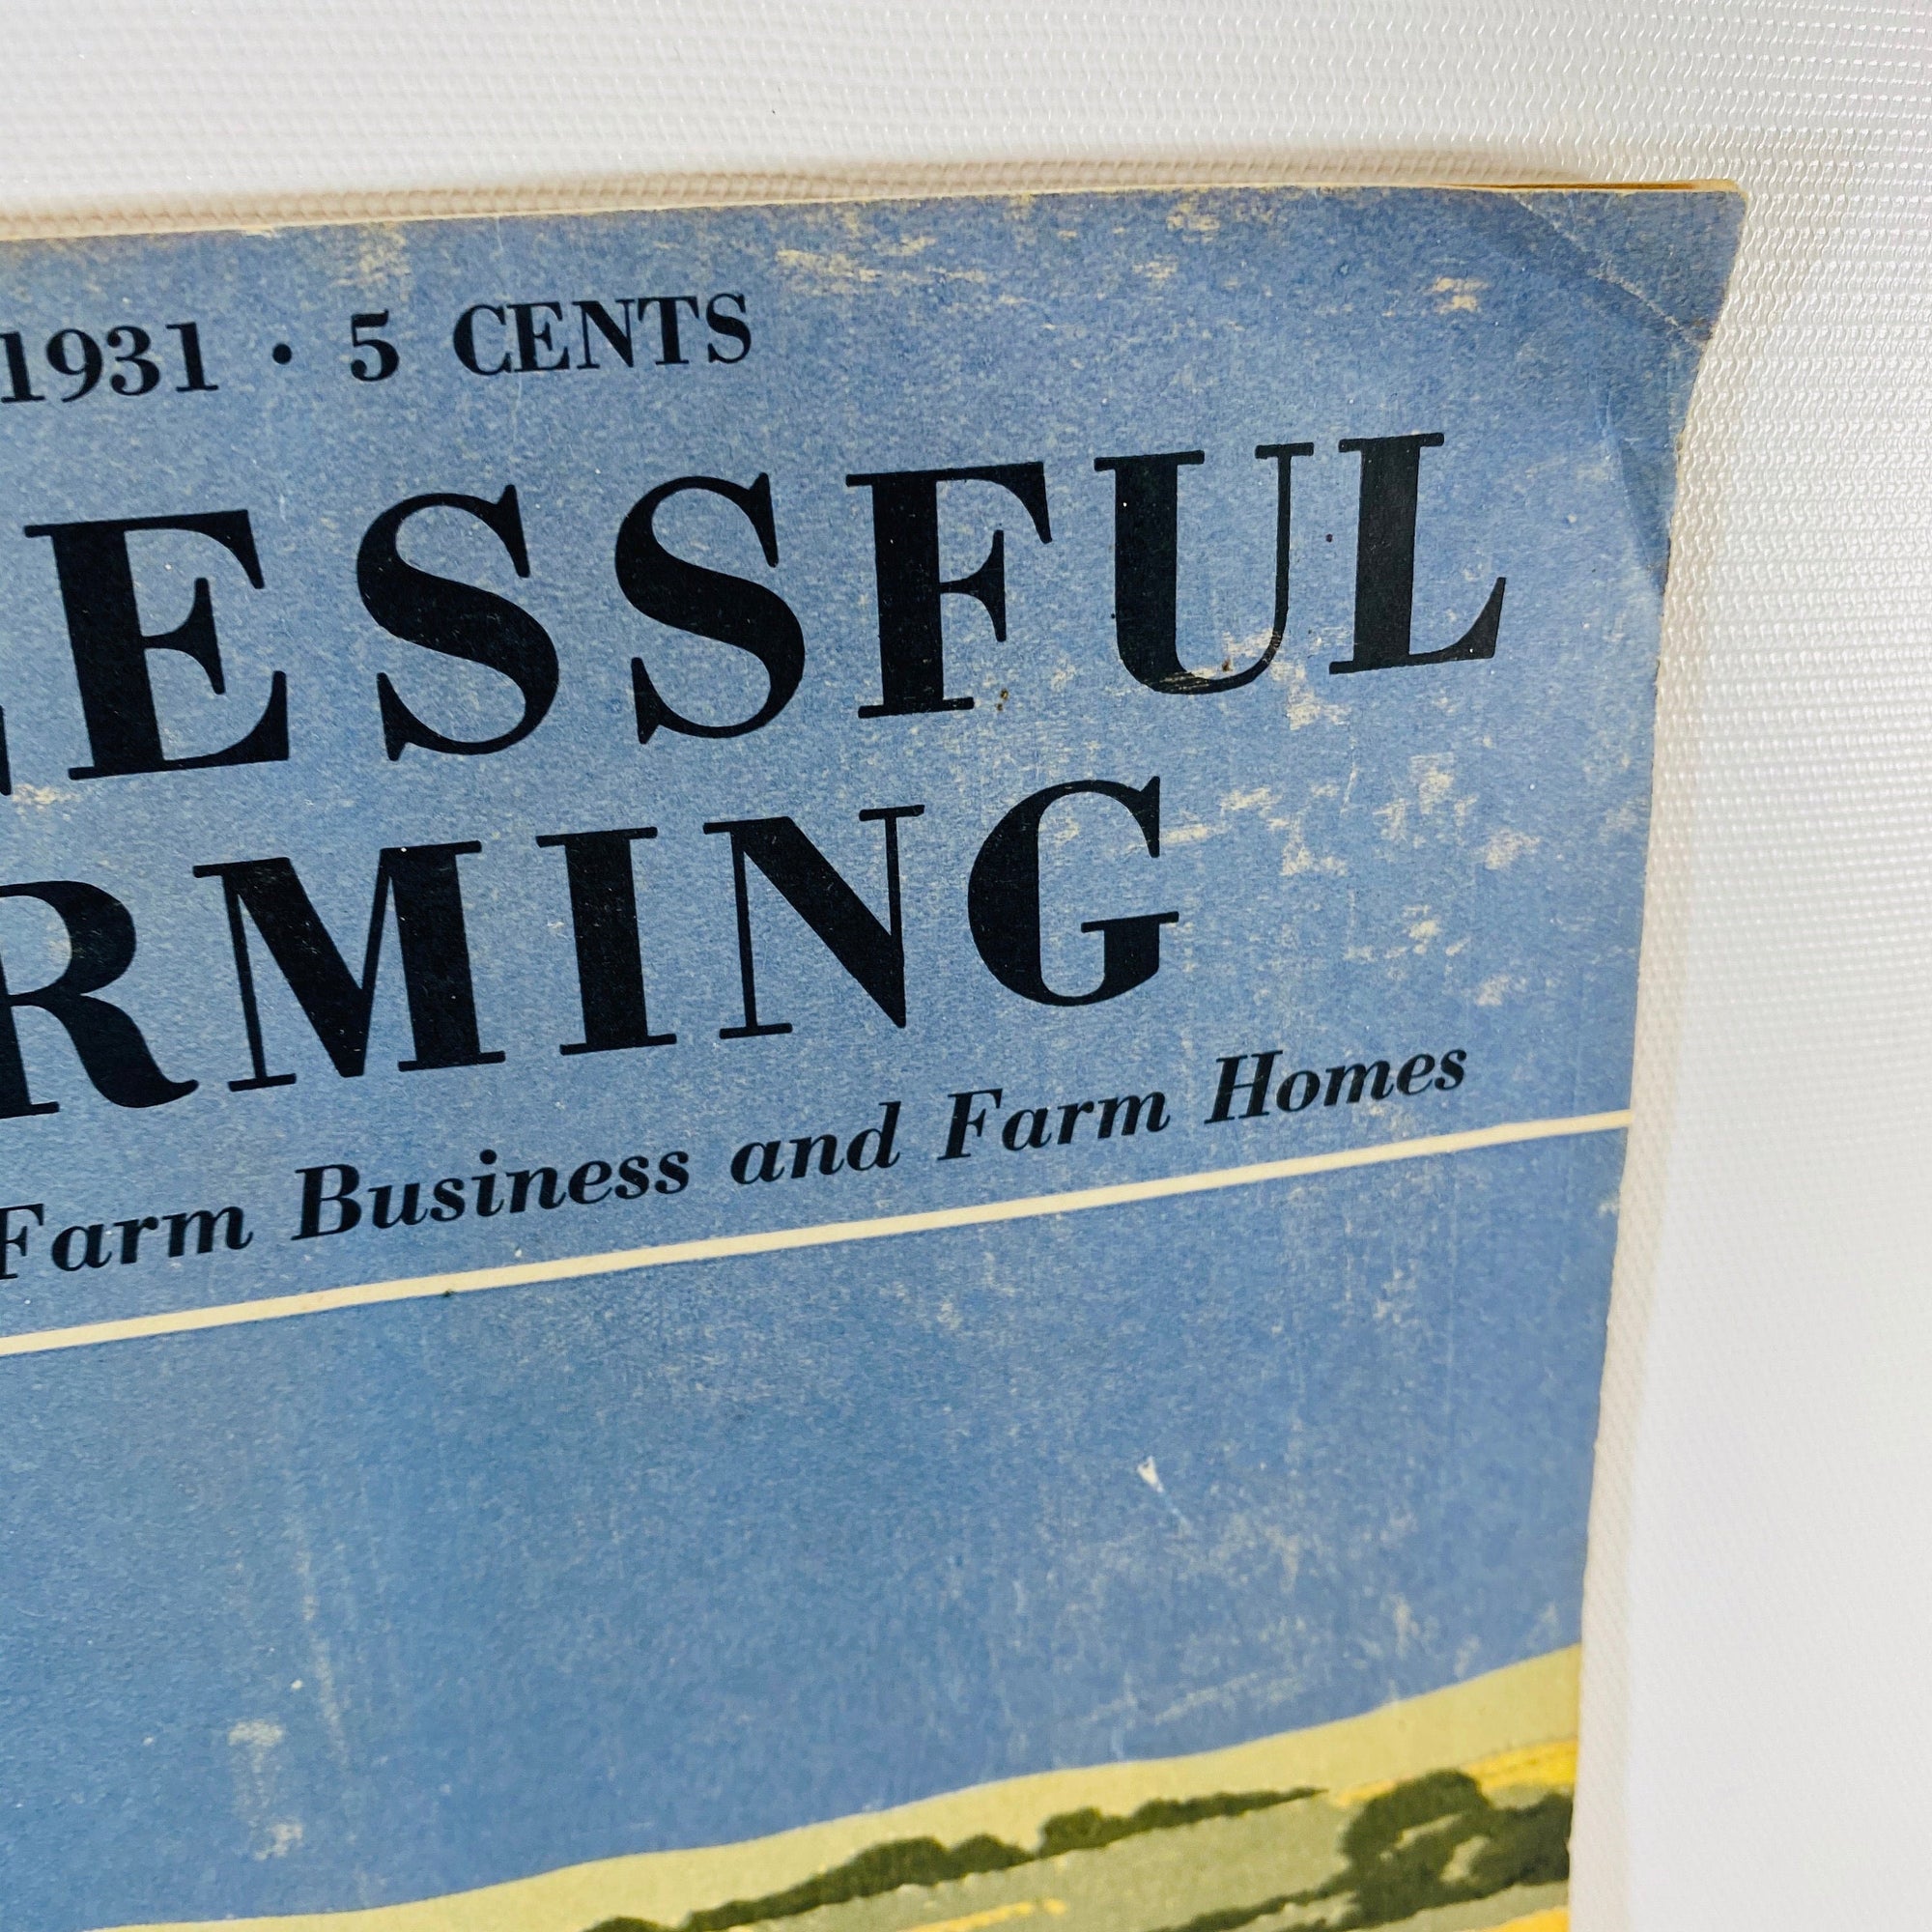 Successful Farming The Magazine of Farm Business and Homes July 1931